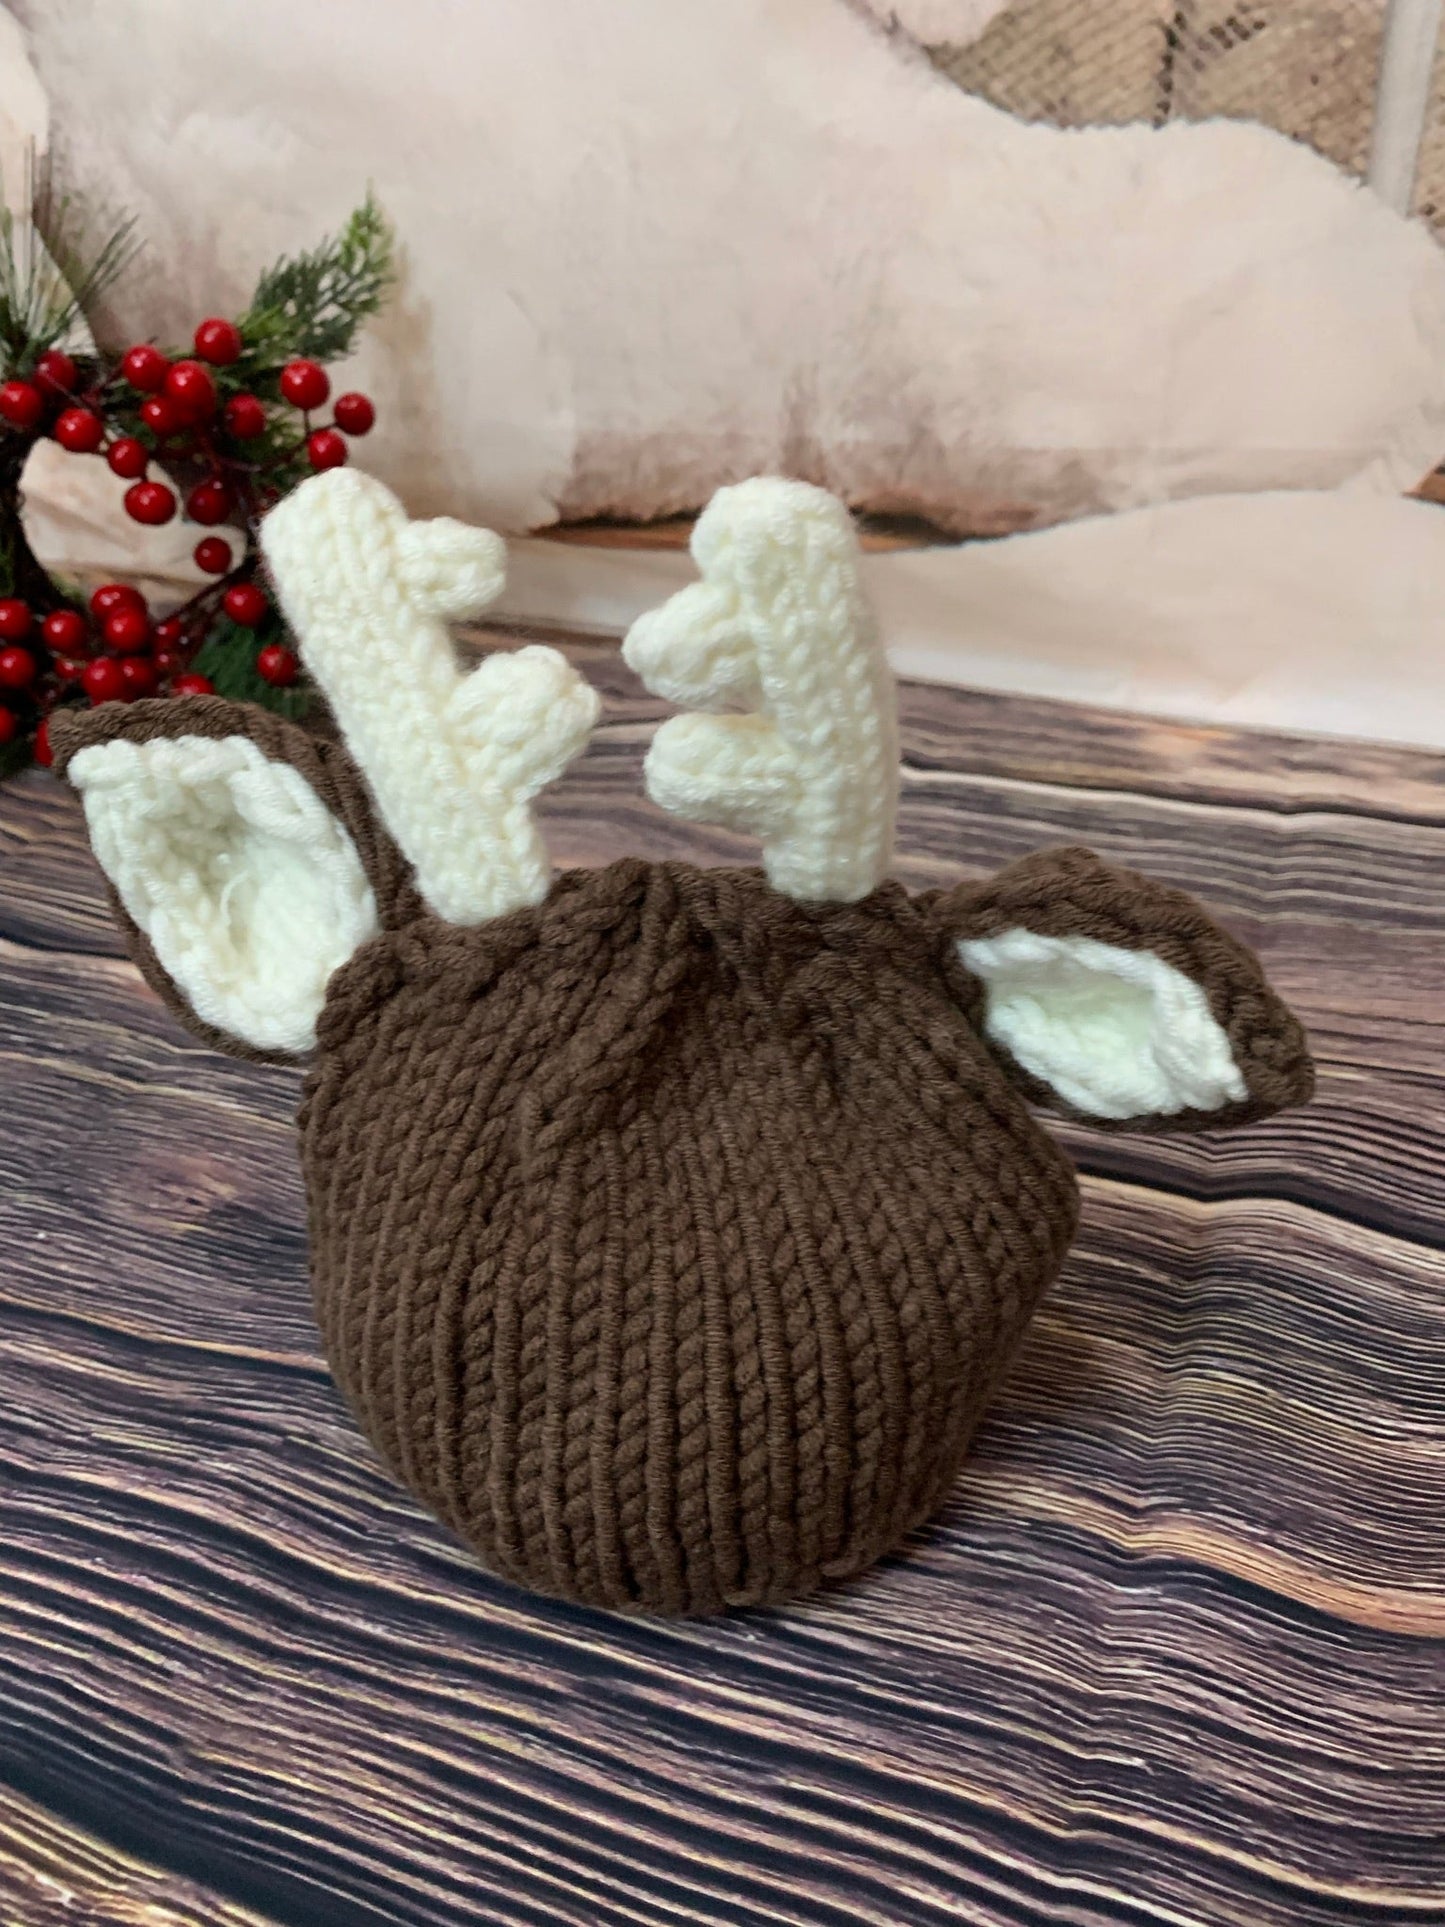 Handmade Newborn Baby Deer Outfit - Adorable Crochet Photo Prop - TinySweetPeaBoutique